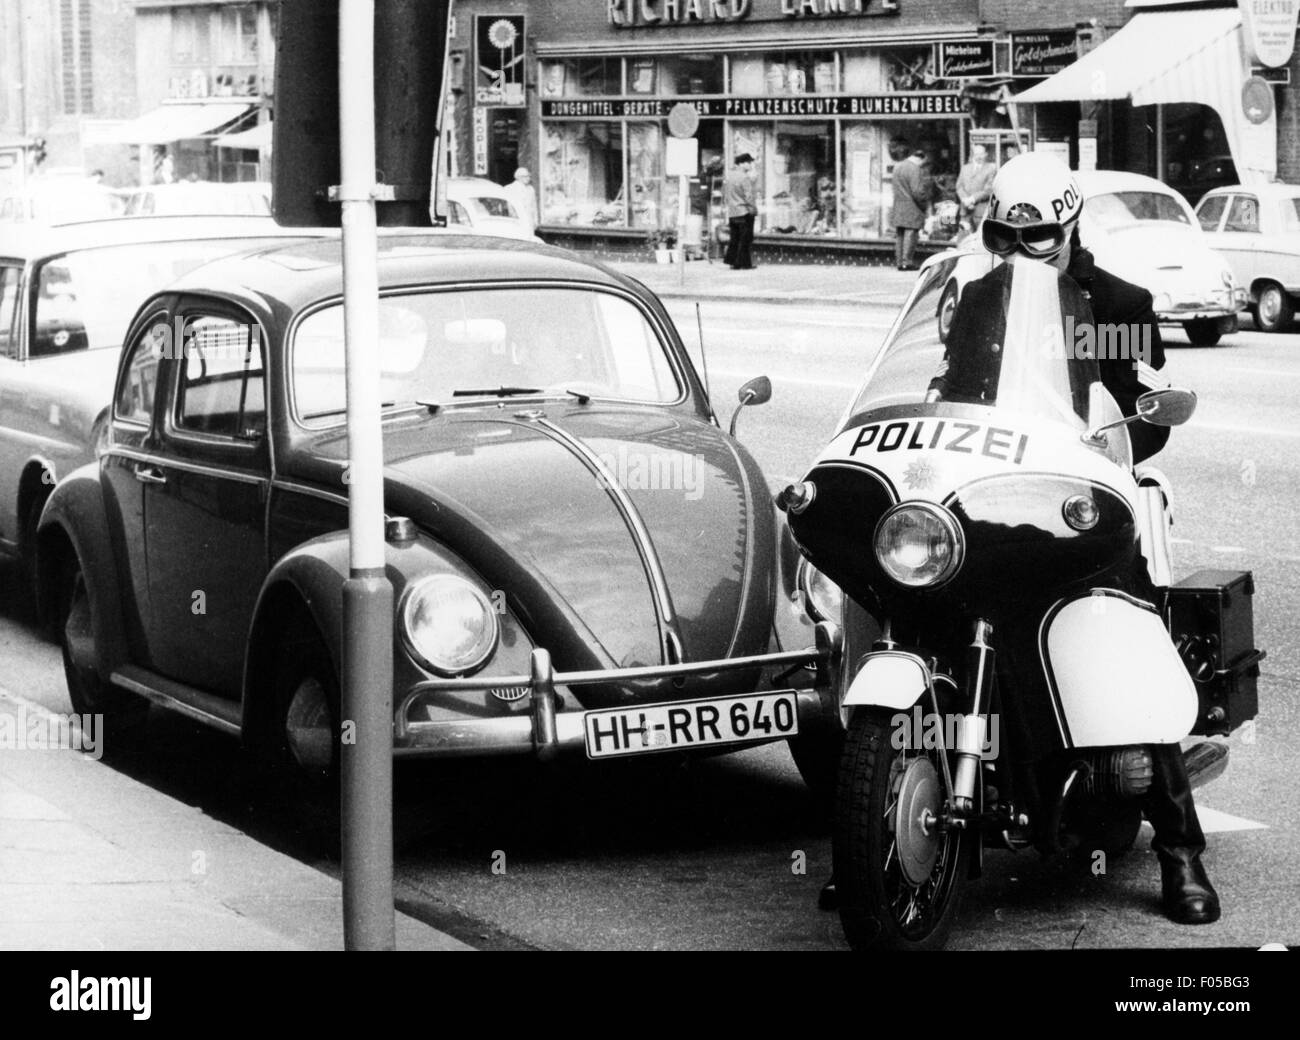 police, Germany, traffic police, policeman on motorcycle, Hamburg, 1970s, Additional-Rights-Clearences-Not Available Stock Photo